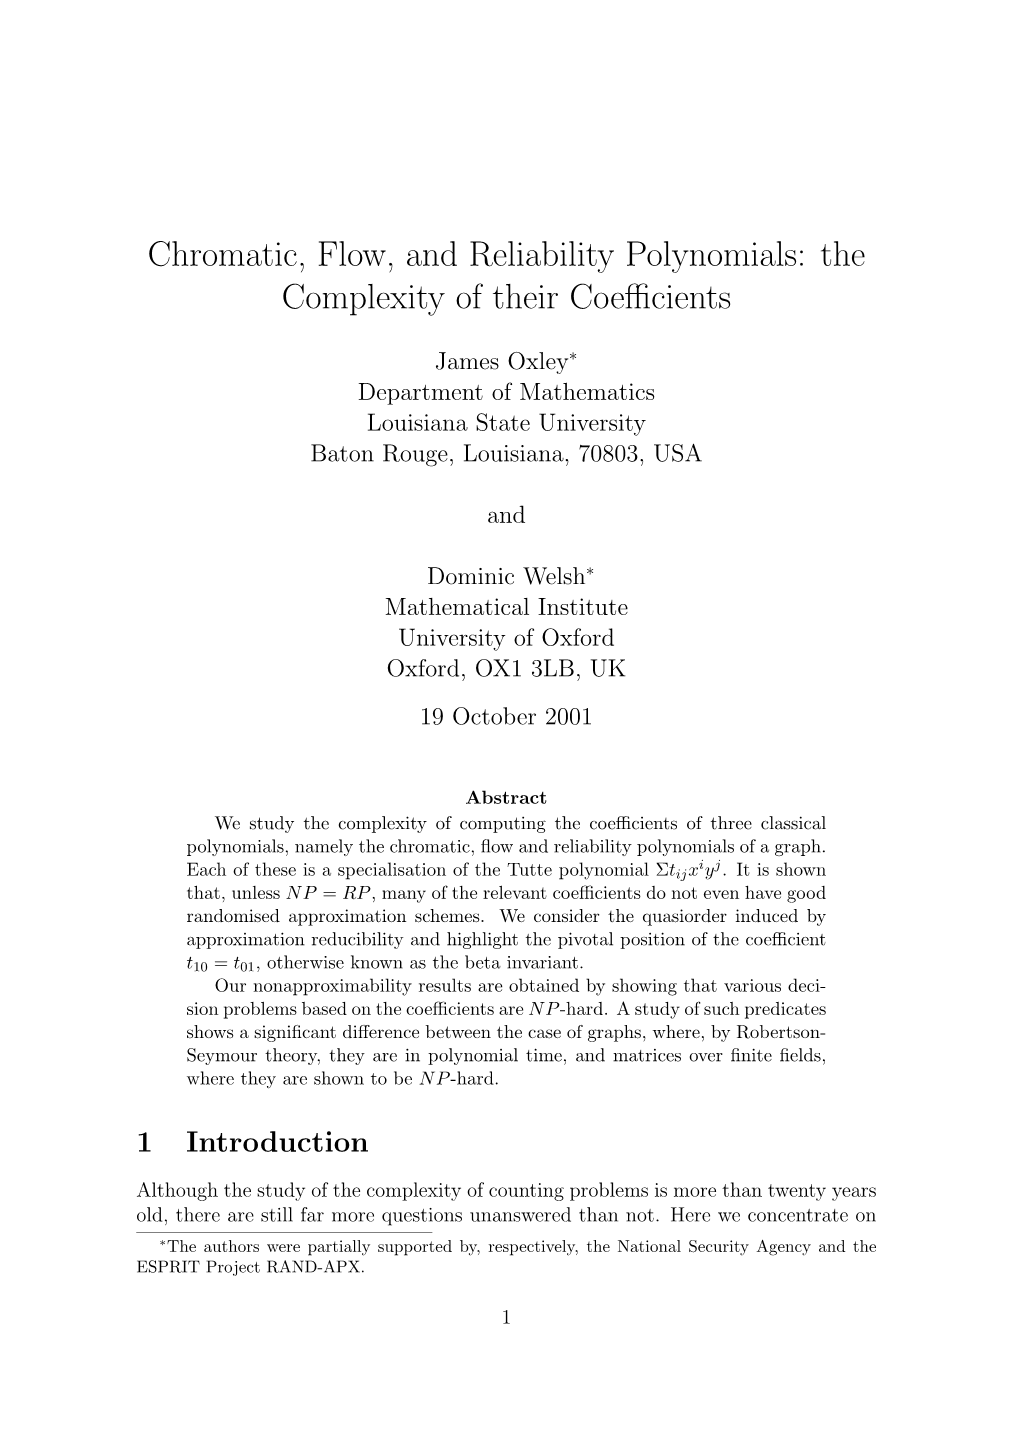 Chromatic, Flow, and Reliability Polynomials: the Complexity of Their Coeﬃcients